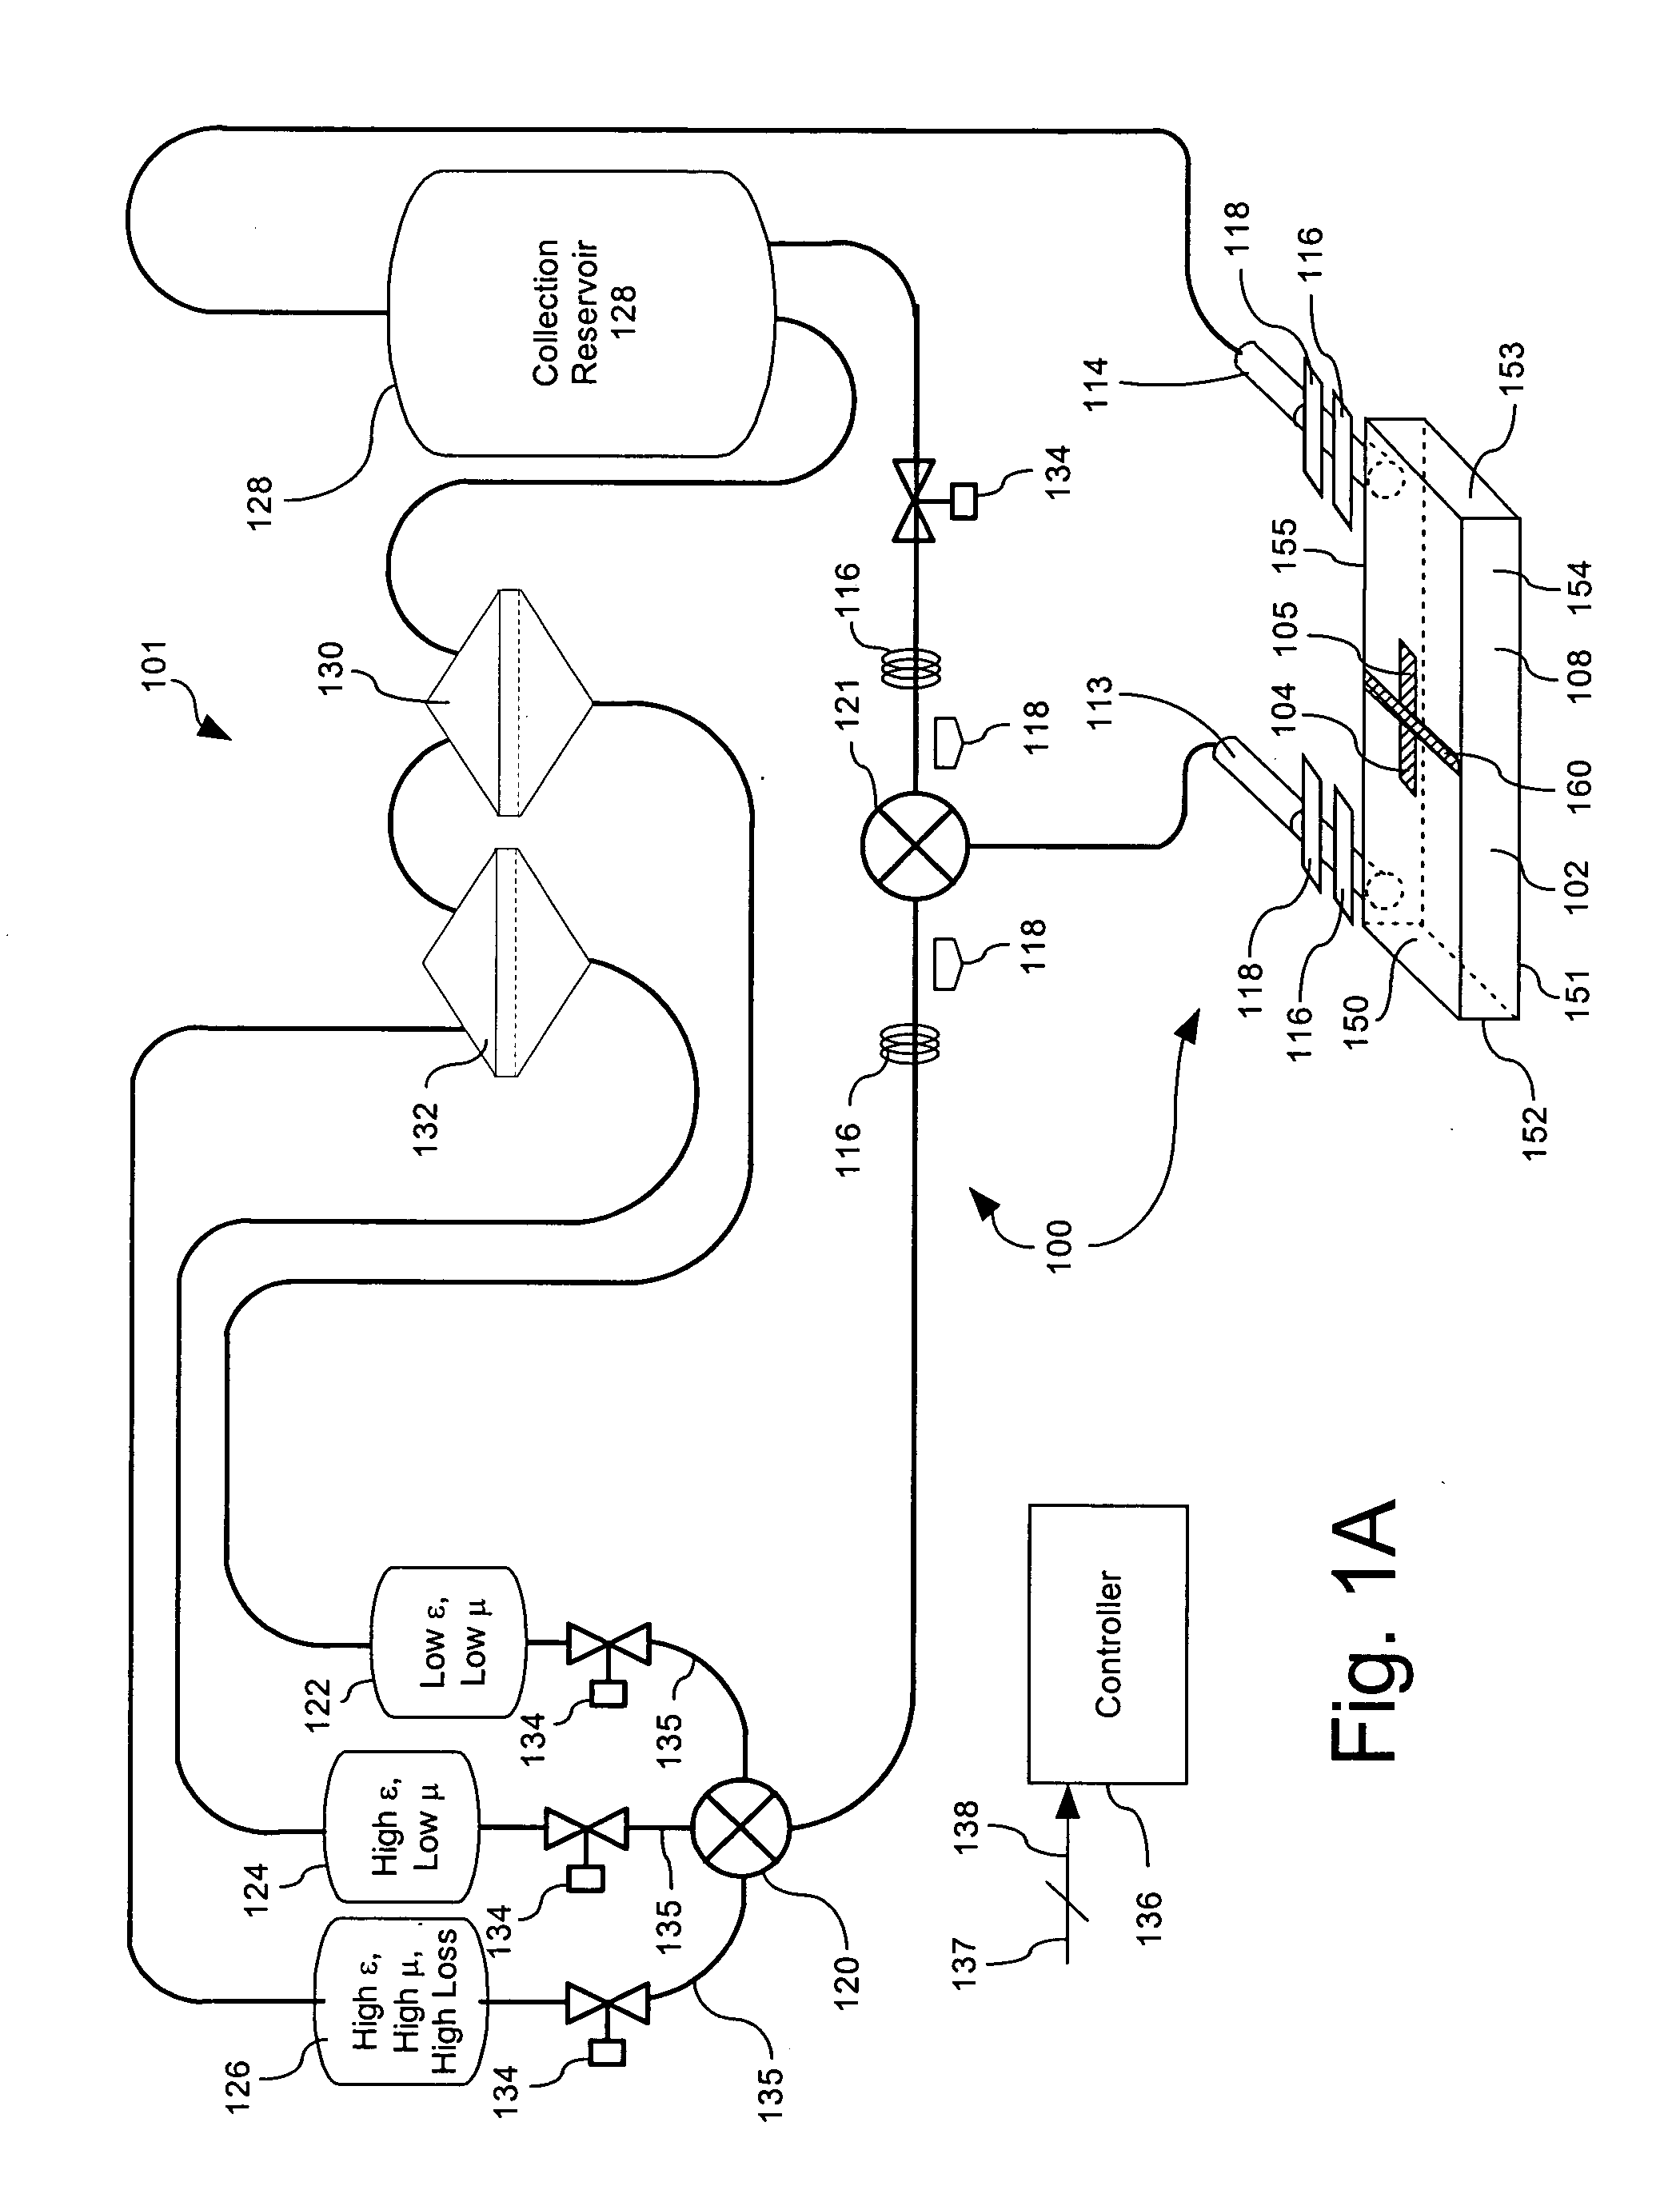 Continuously tunable resonant cavity